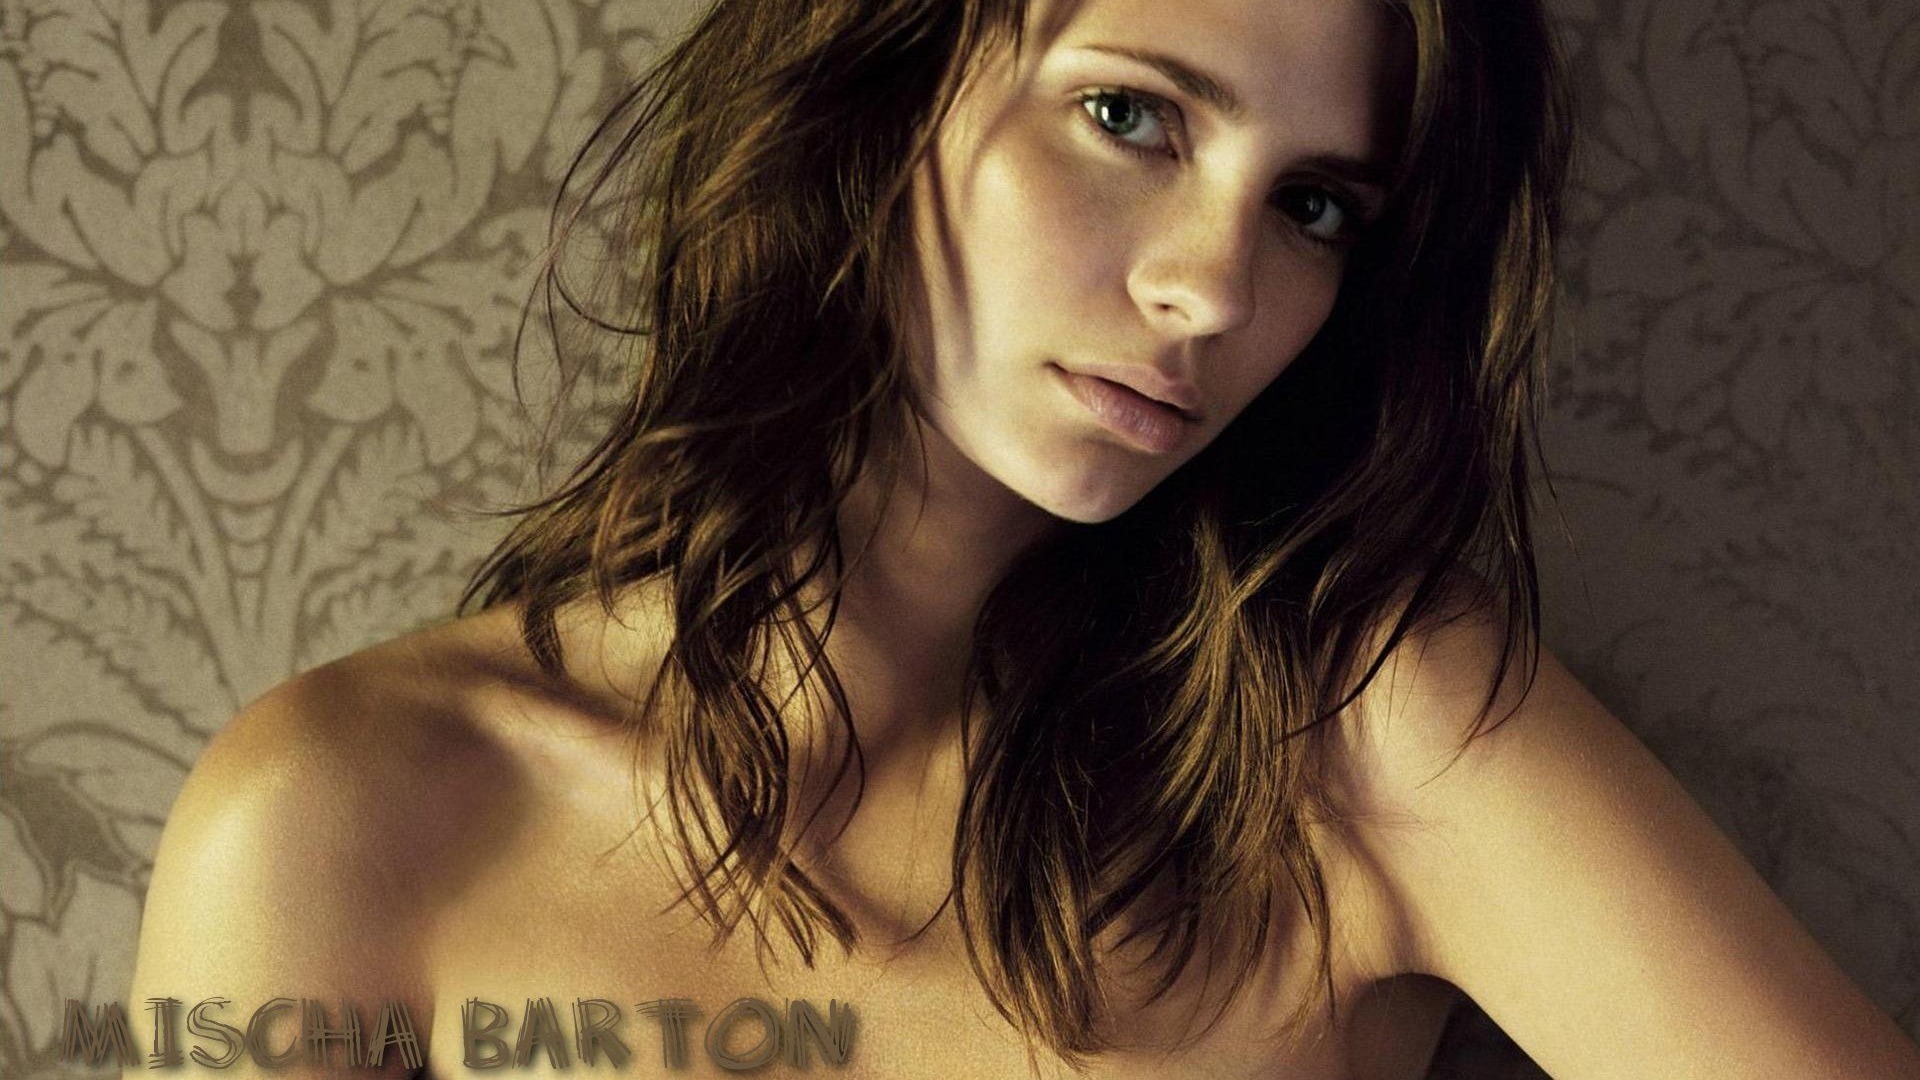 Mischa Barton #086 - 1920x1080 Wallpapers Pictures Photos Images